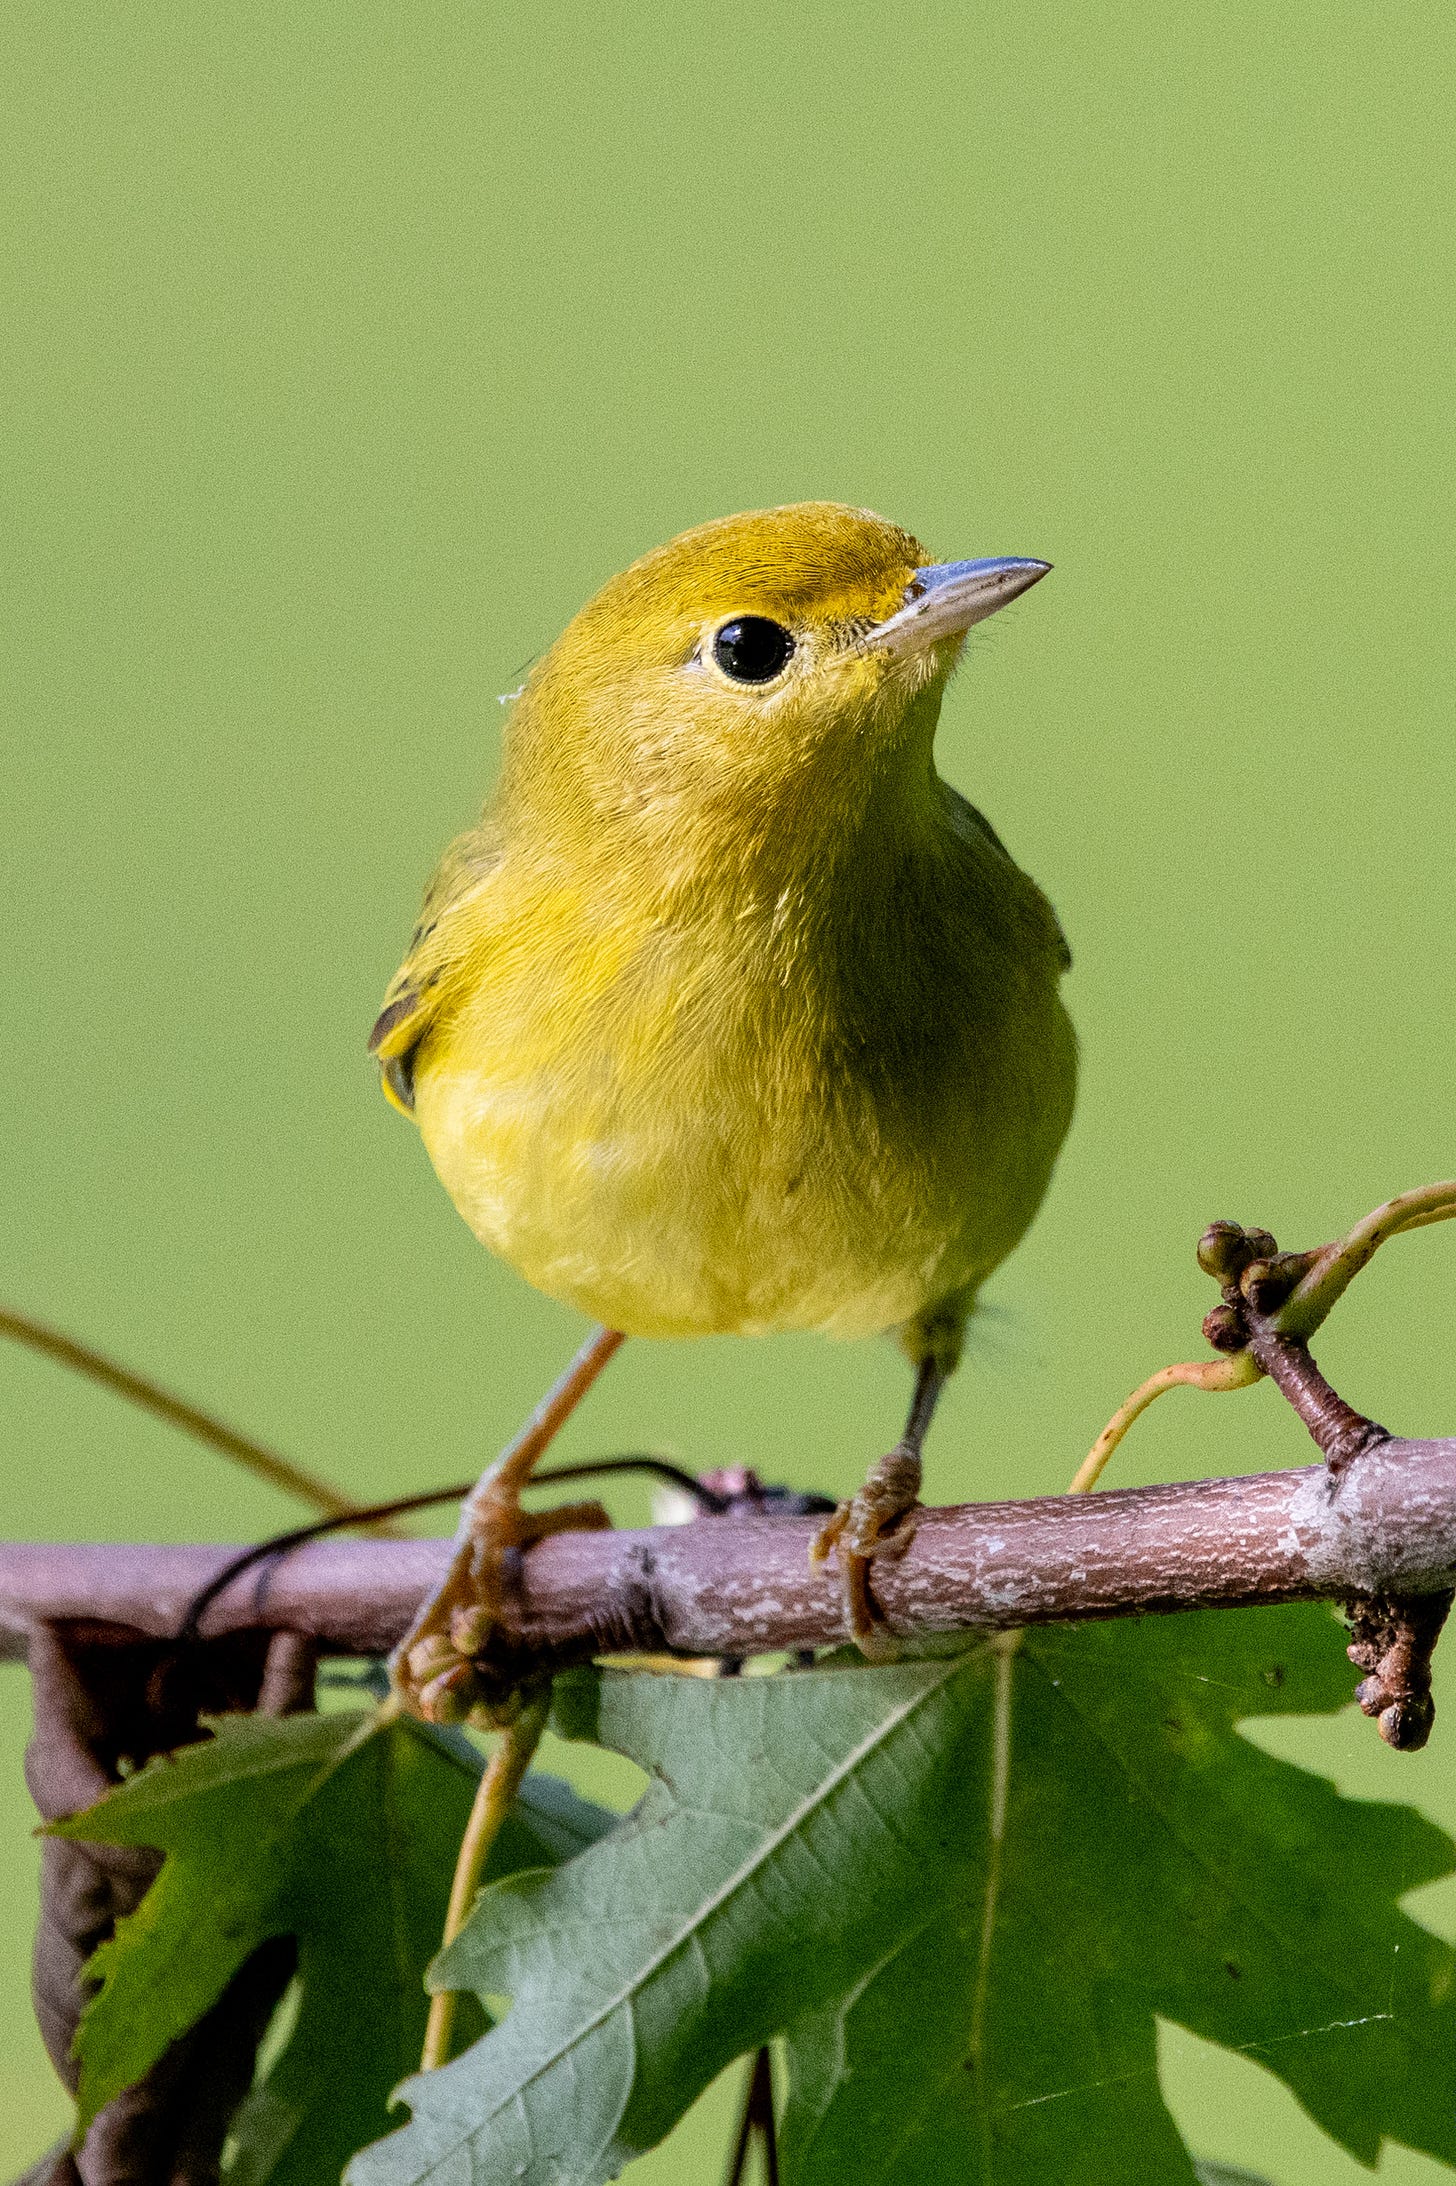 A close-up of a yellow warbler perched on a branch, eyeing the camera